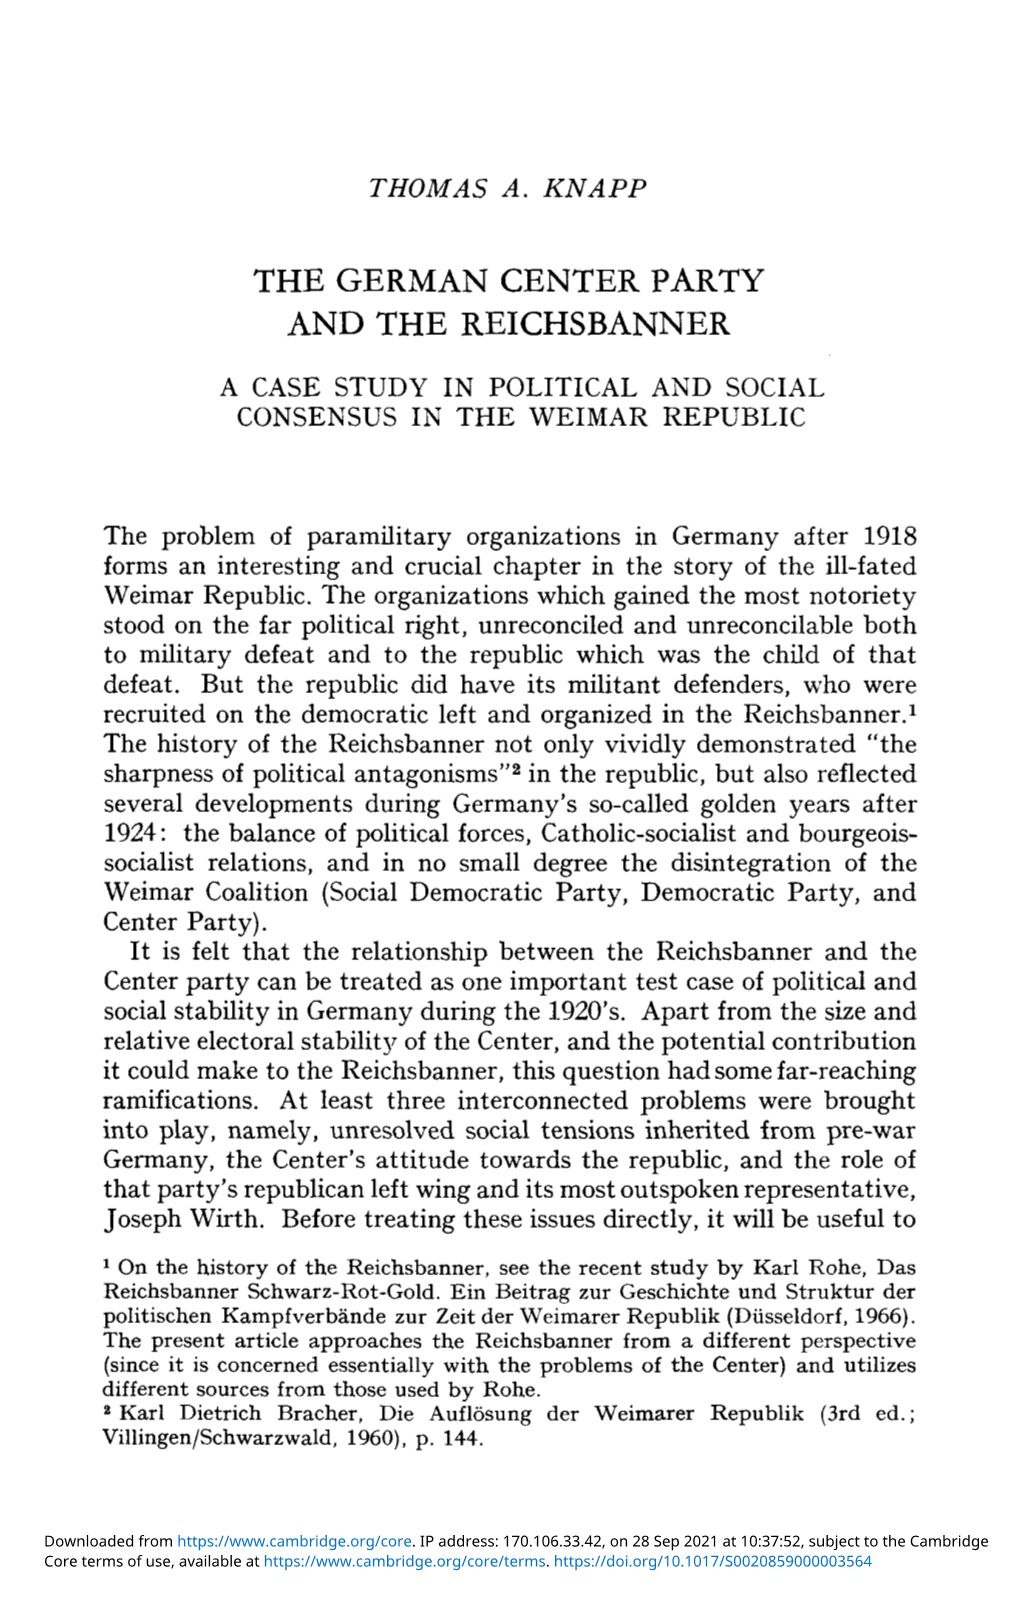 The German Center Party and the Reichsbanner